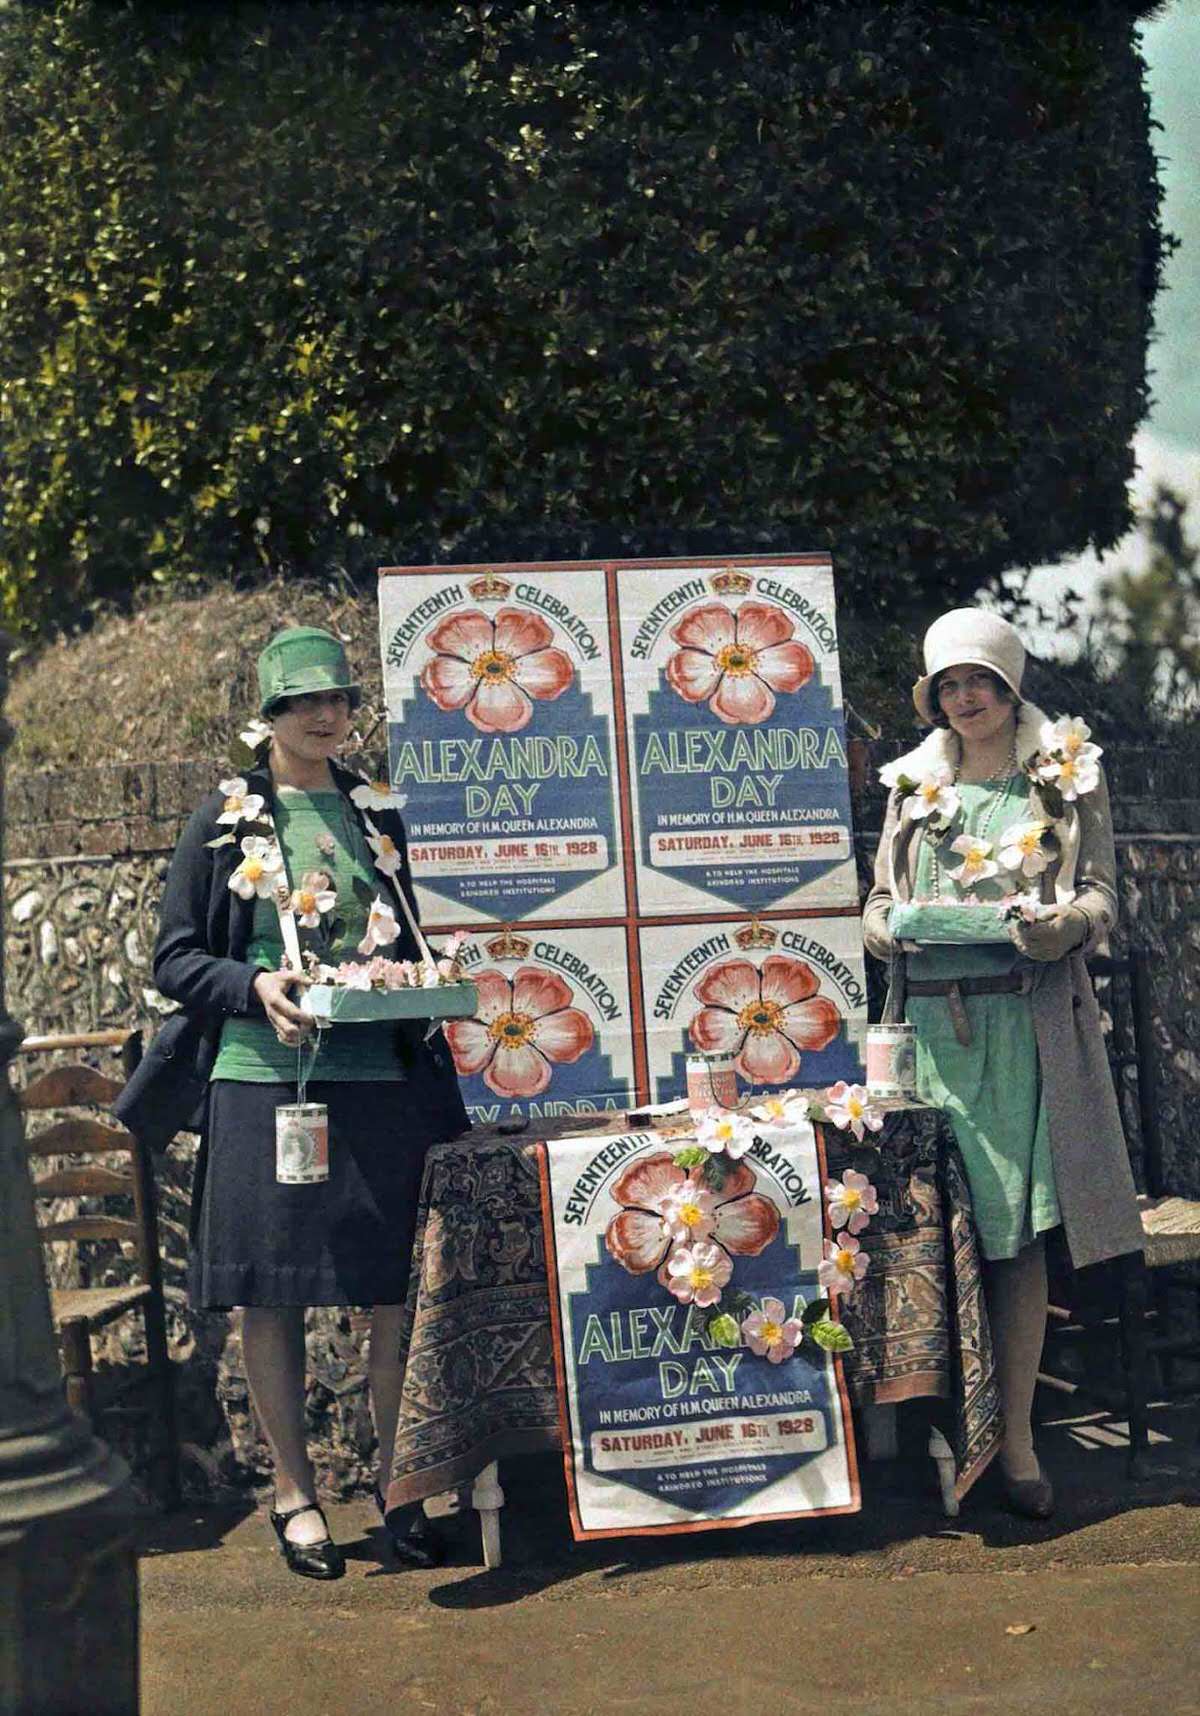 Women selling Queen Alexandra roses for charity, in Seaford, East Sussex.